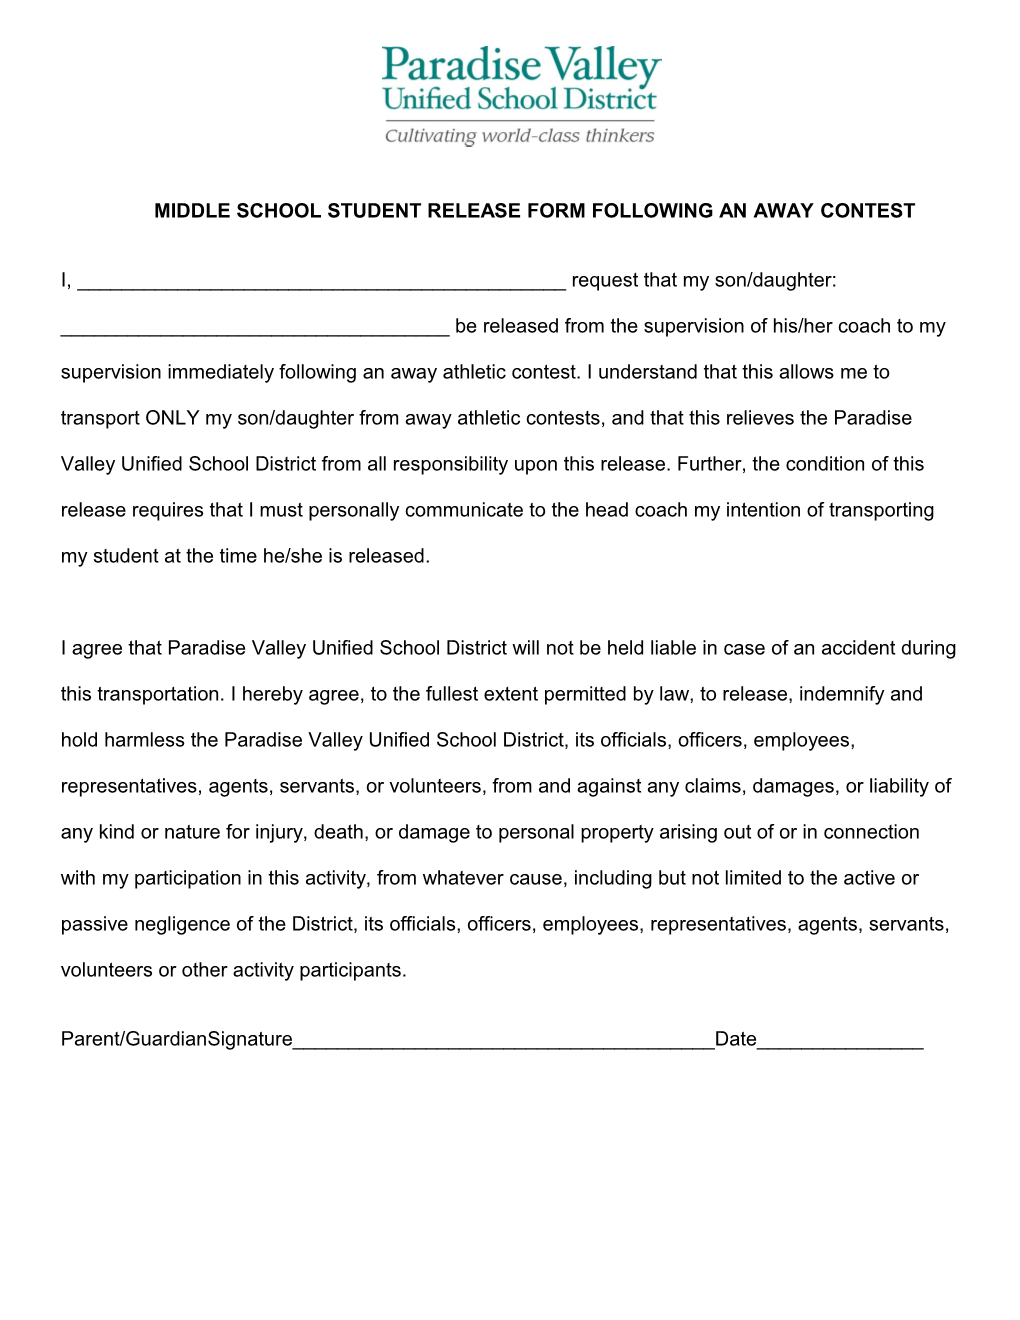 Middle School Student Release Form Following an Away Contest